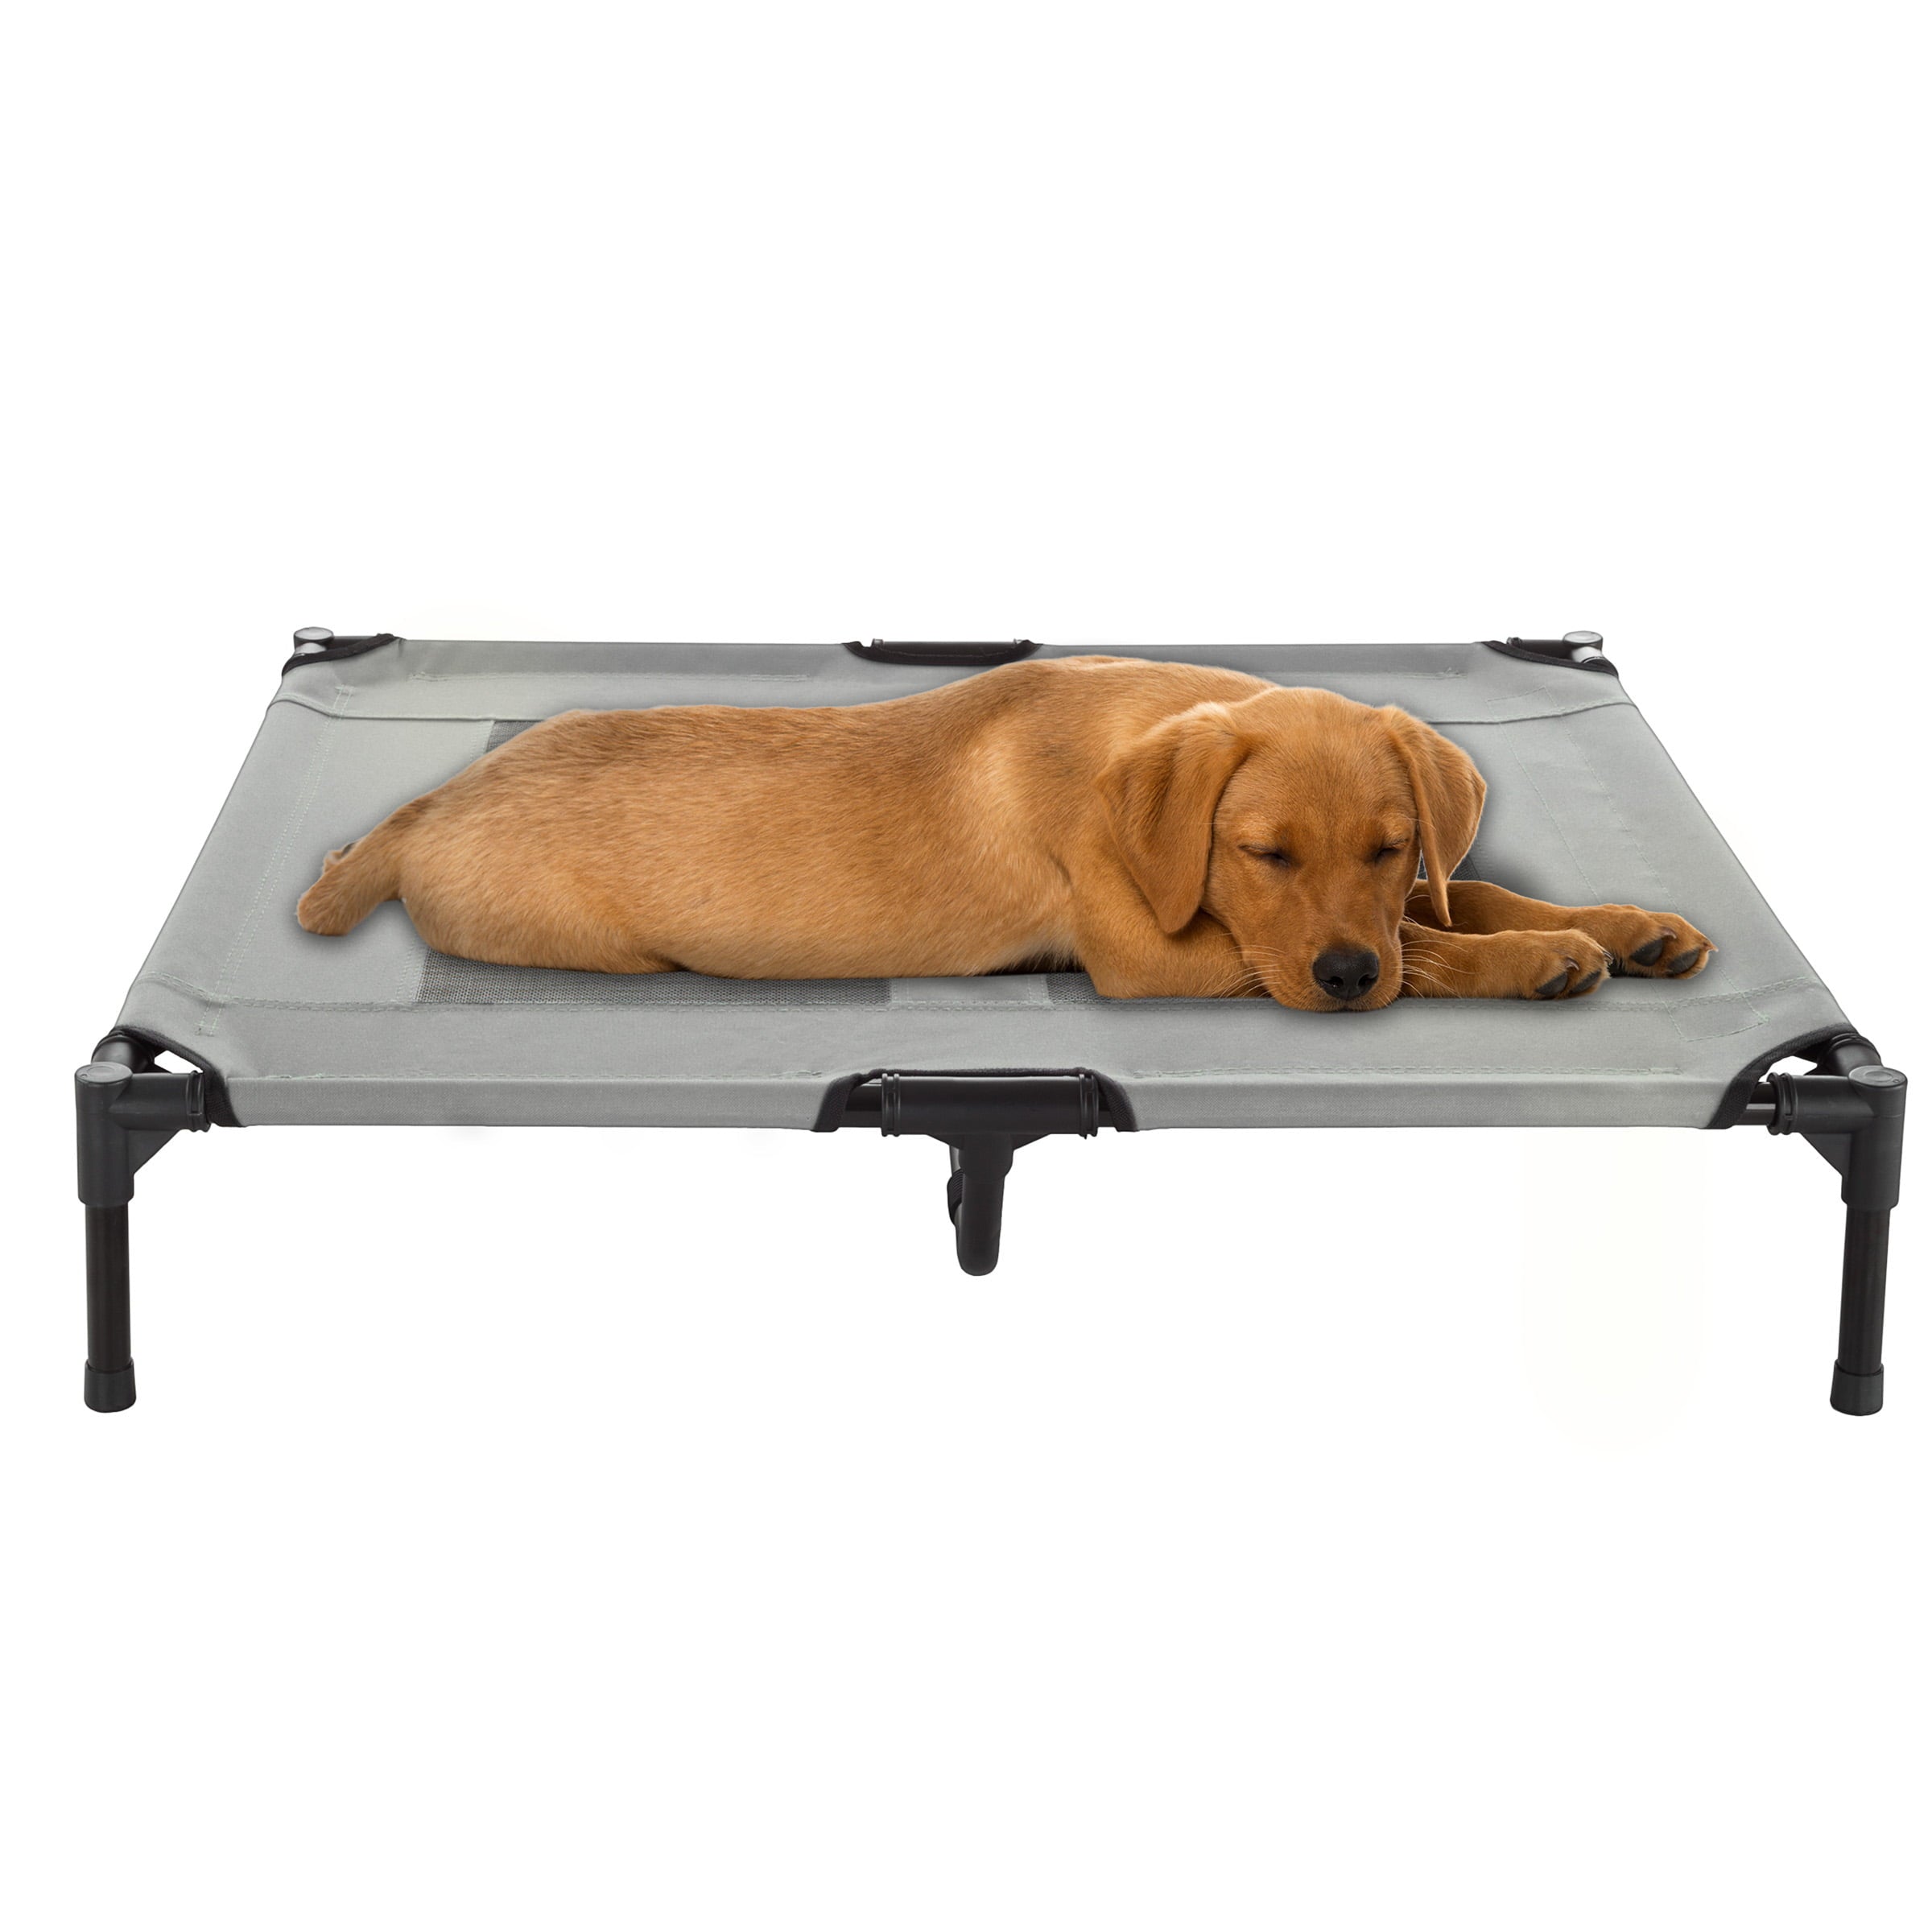 Elevated Dog Bed - 36x29.75-Inch Portable Pet Bed with Non-Slip Feet - Indoor/Outdoor Dog Cot or Puppy Bed for Pets up to 80lbs by PETMAKER (Gray)